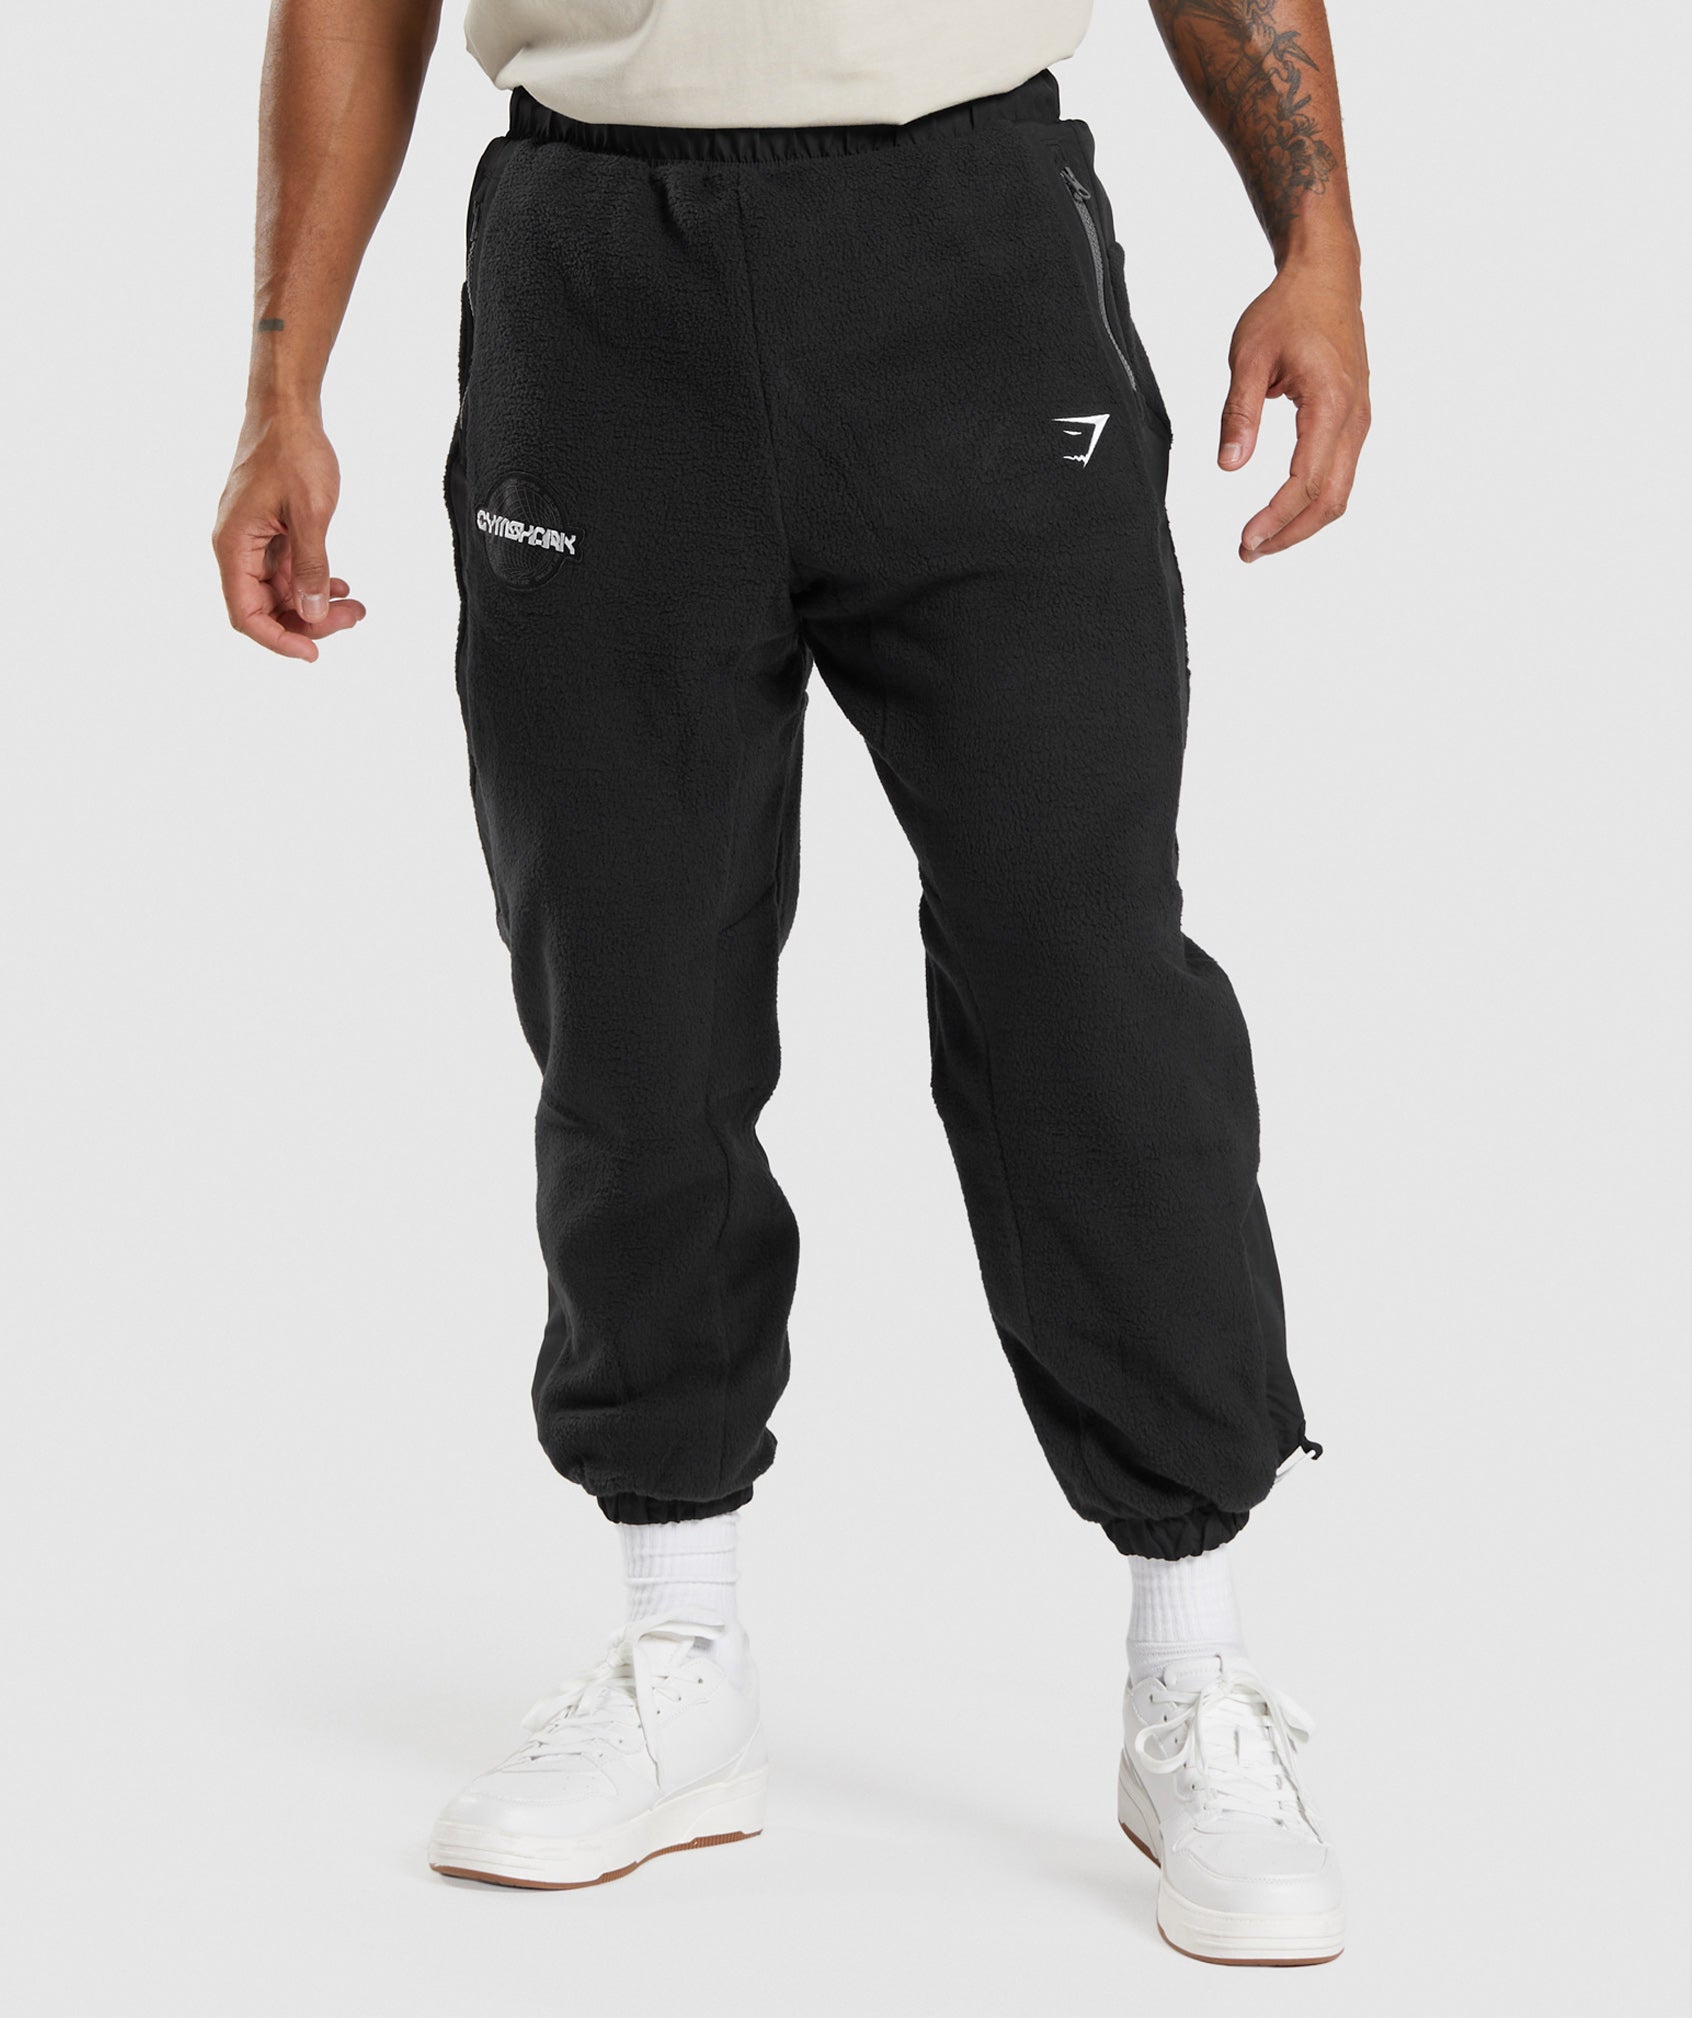 Vibes Joggers in Black - view 1